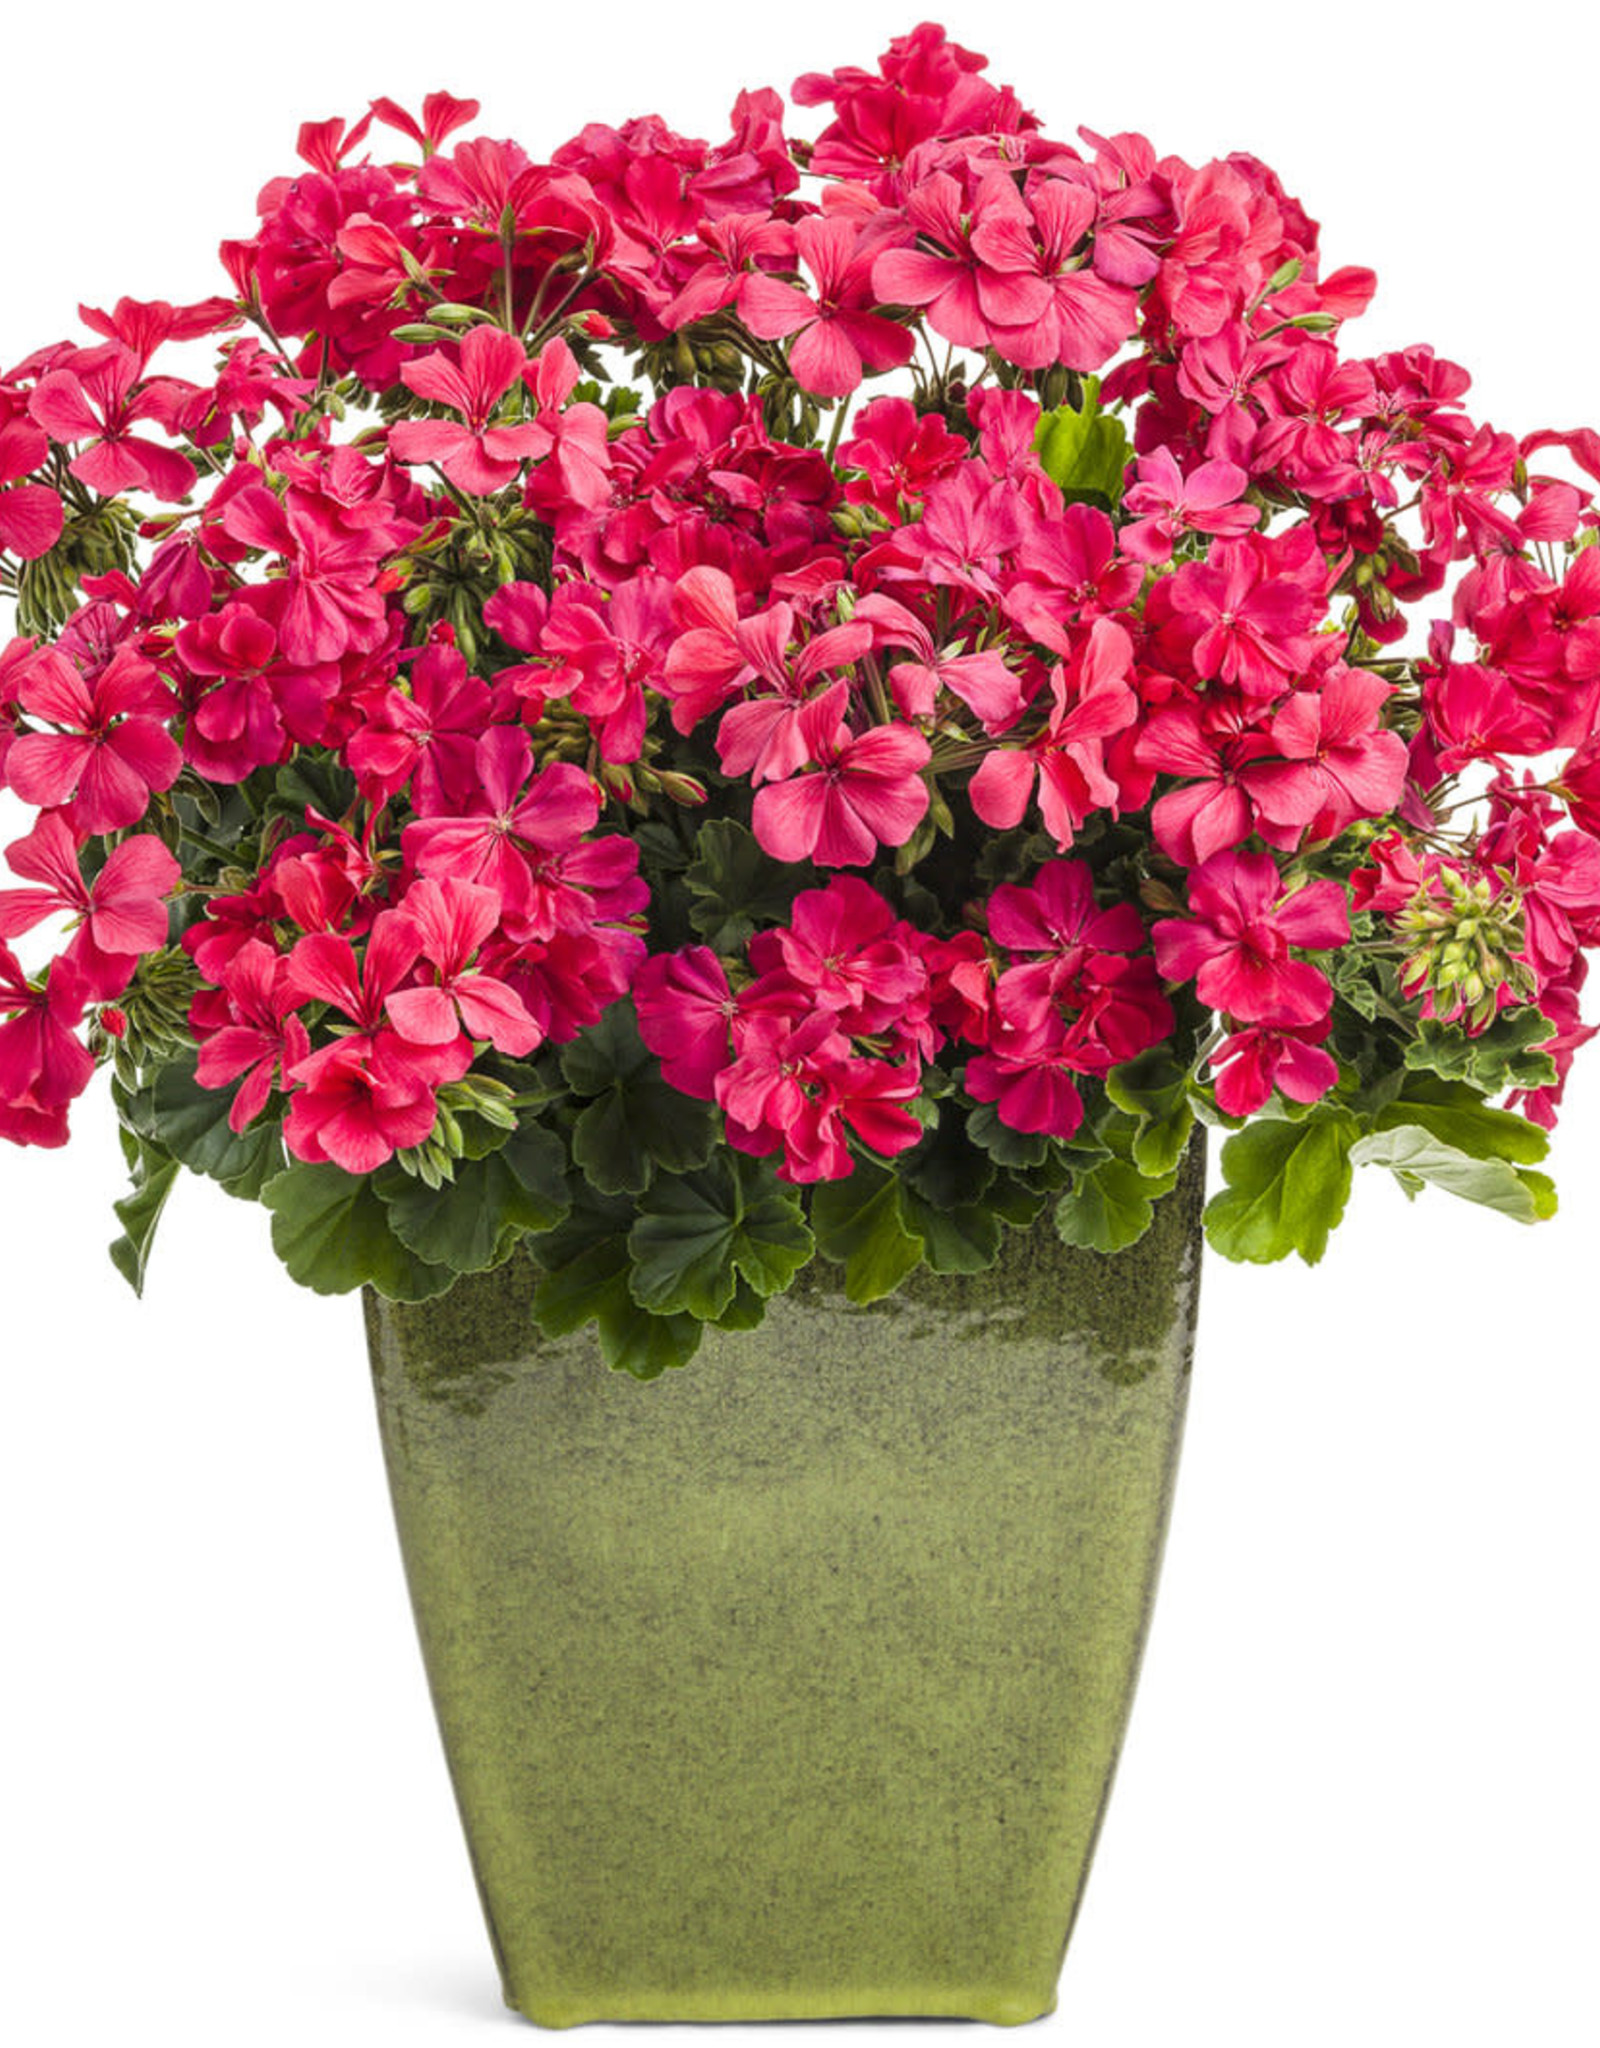 Proven Winners Pelargonium Boldly Hot Pink PW 5.5 in